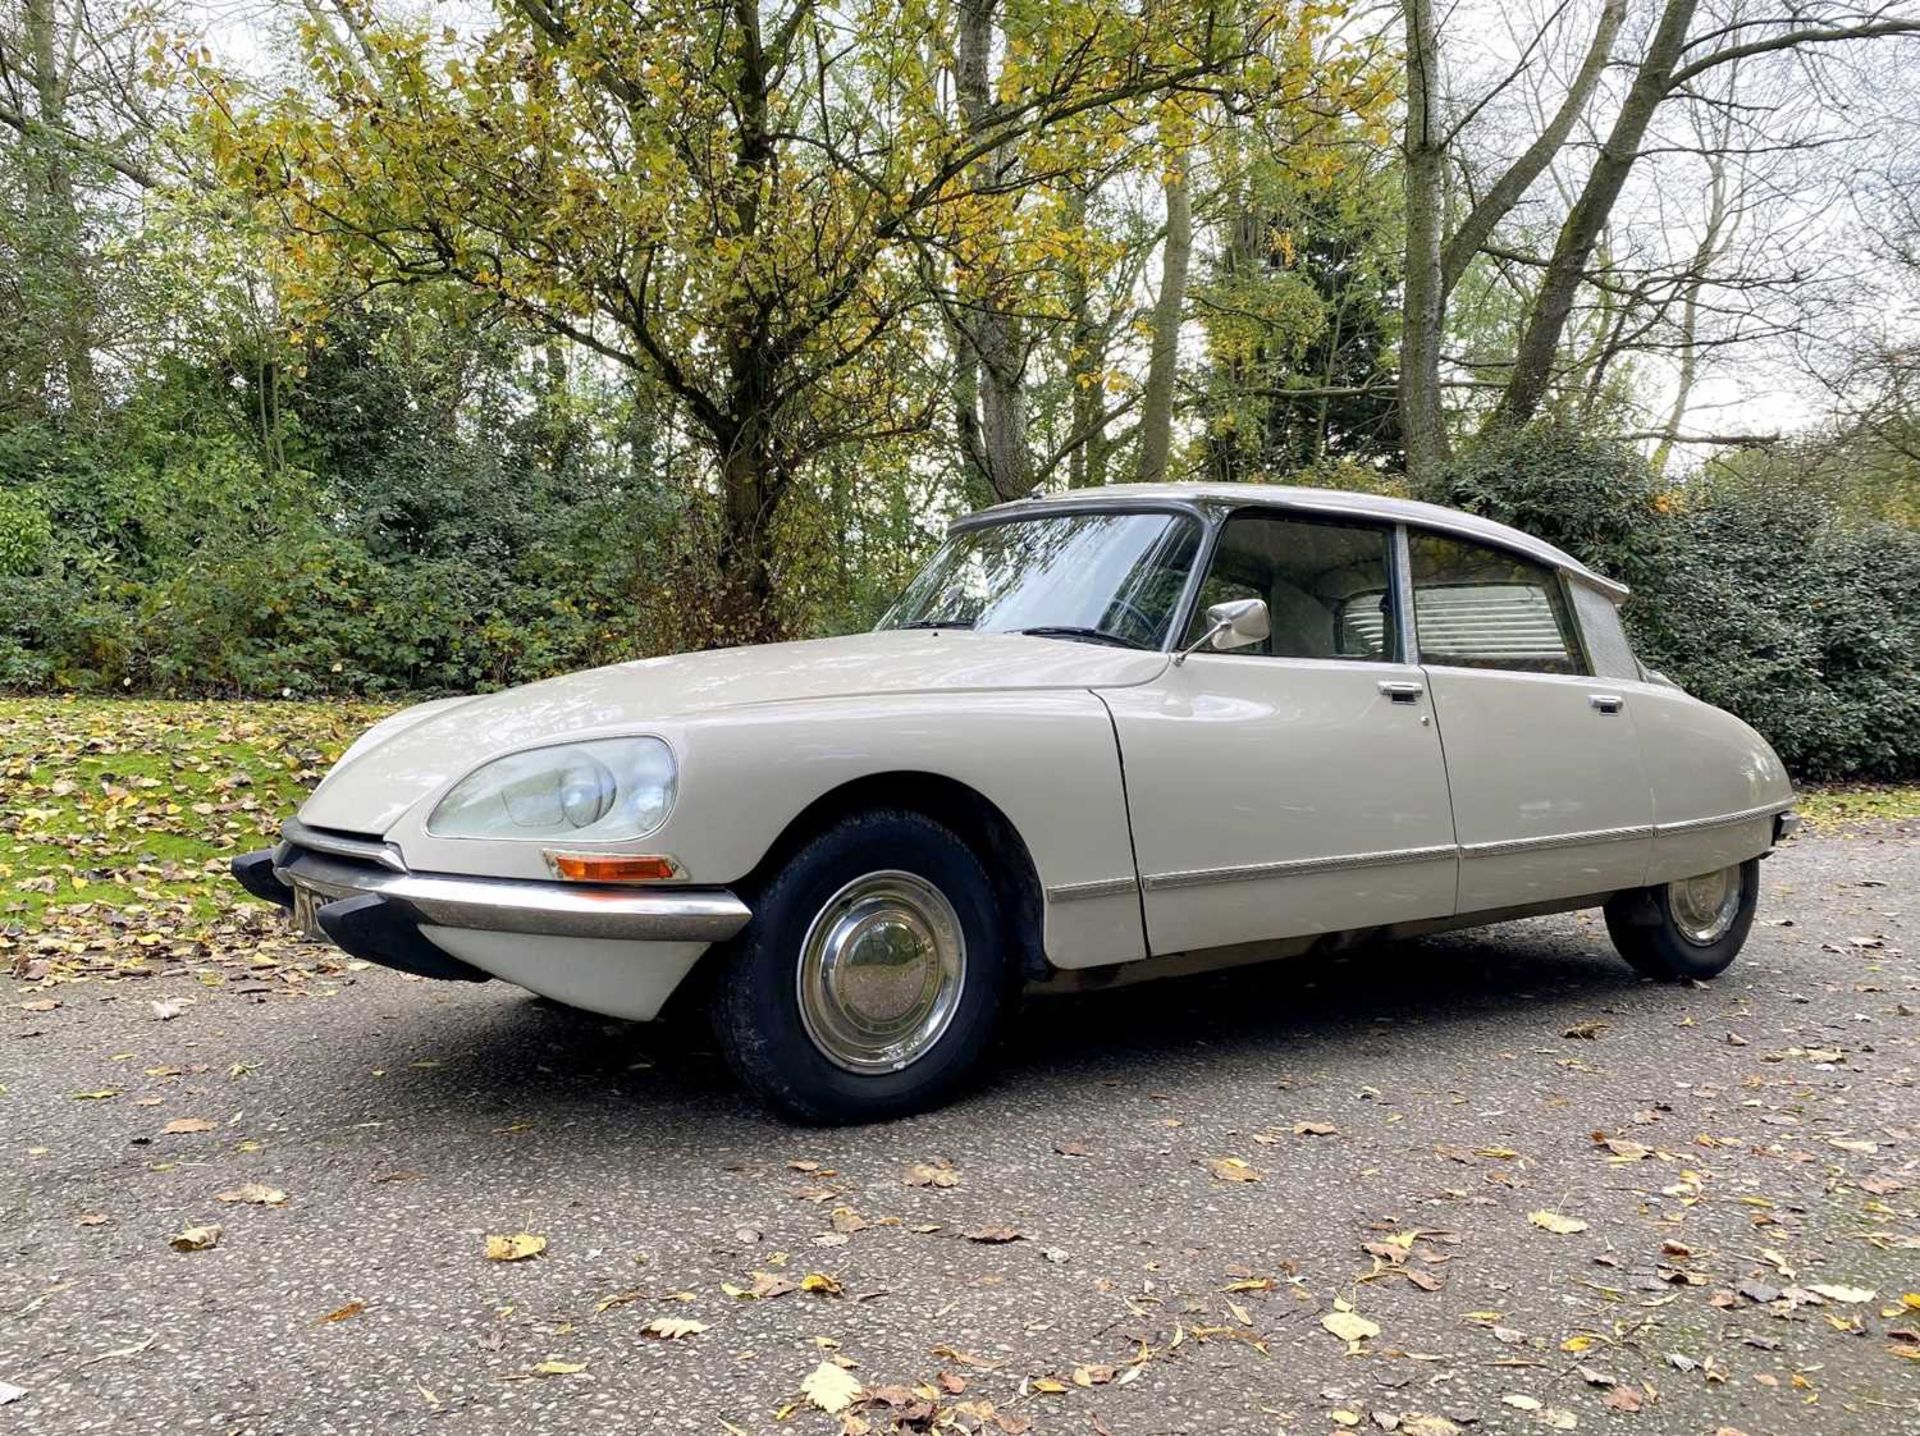 1971 Citroën DS21 Recently completed a 2,000 mile European grand tour - Image 10 of 100